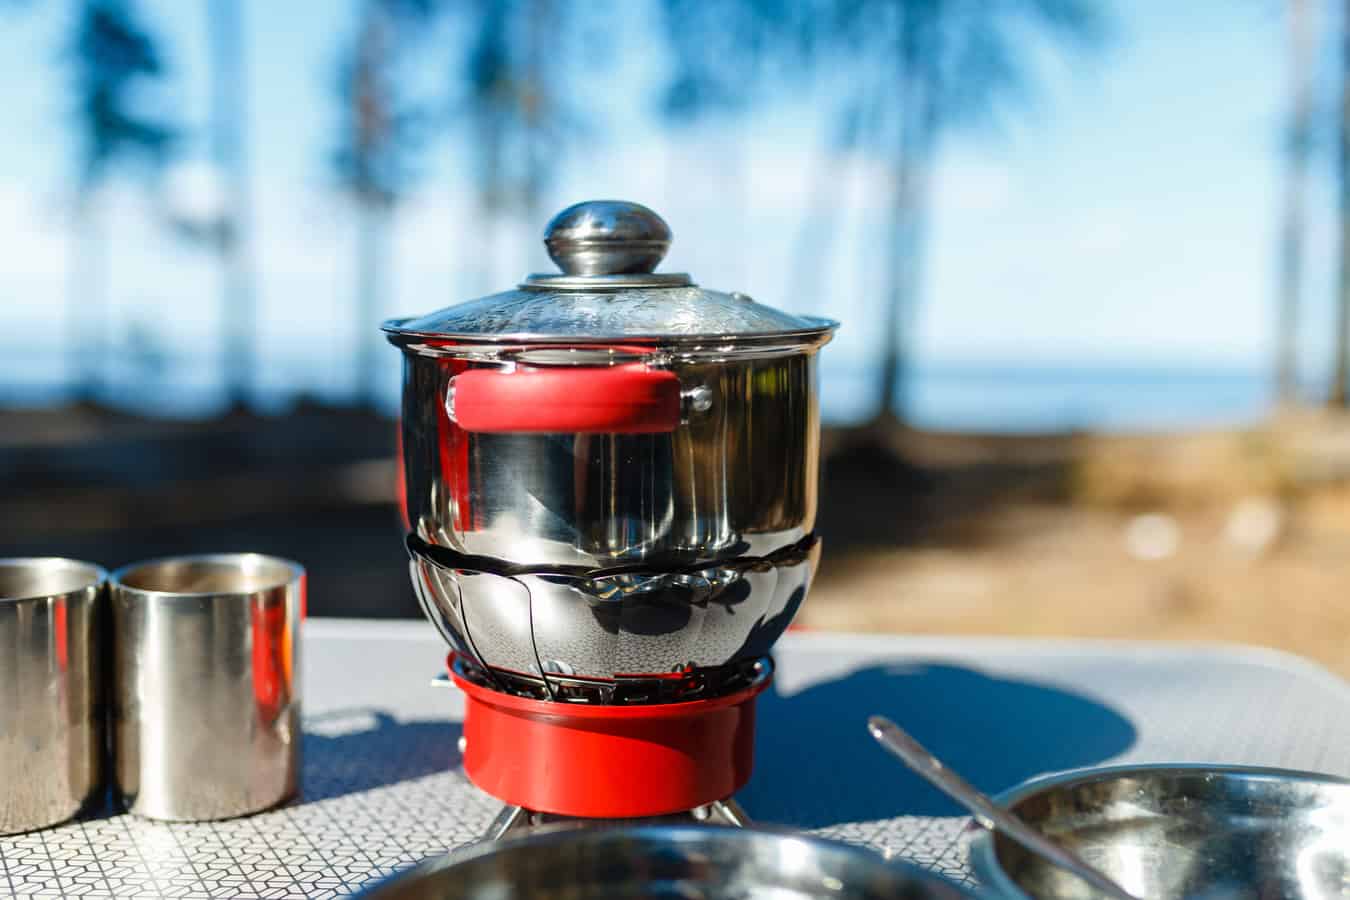 Camping coffee pot sits on outdoor table.